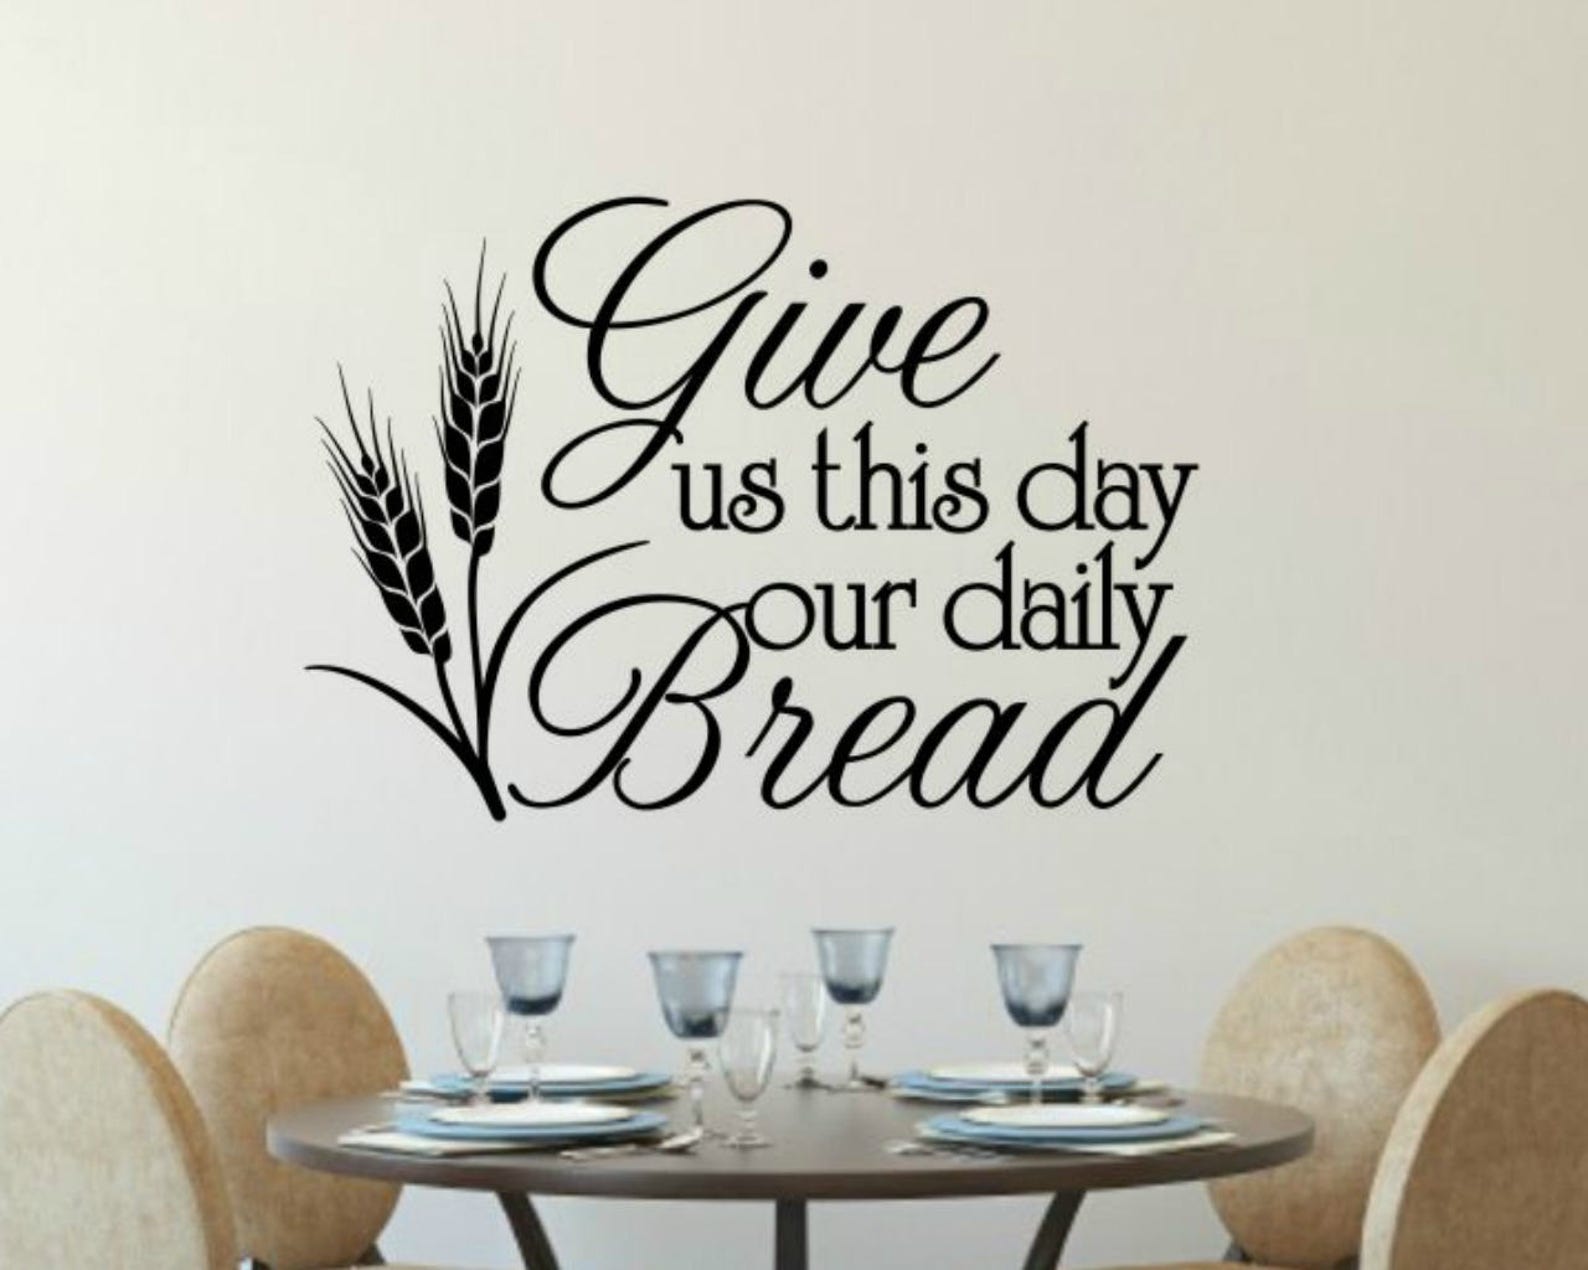 Give Us This Day Our Daily Bread Wall Decal Kitchen Wall Decal Etsy